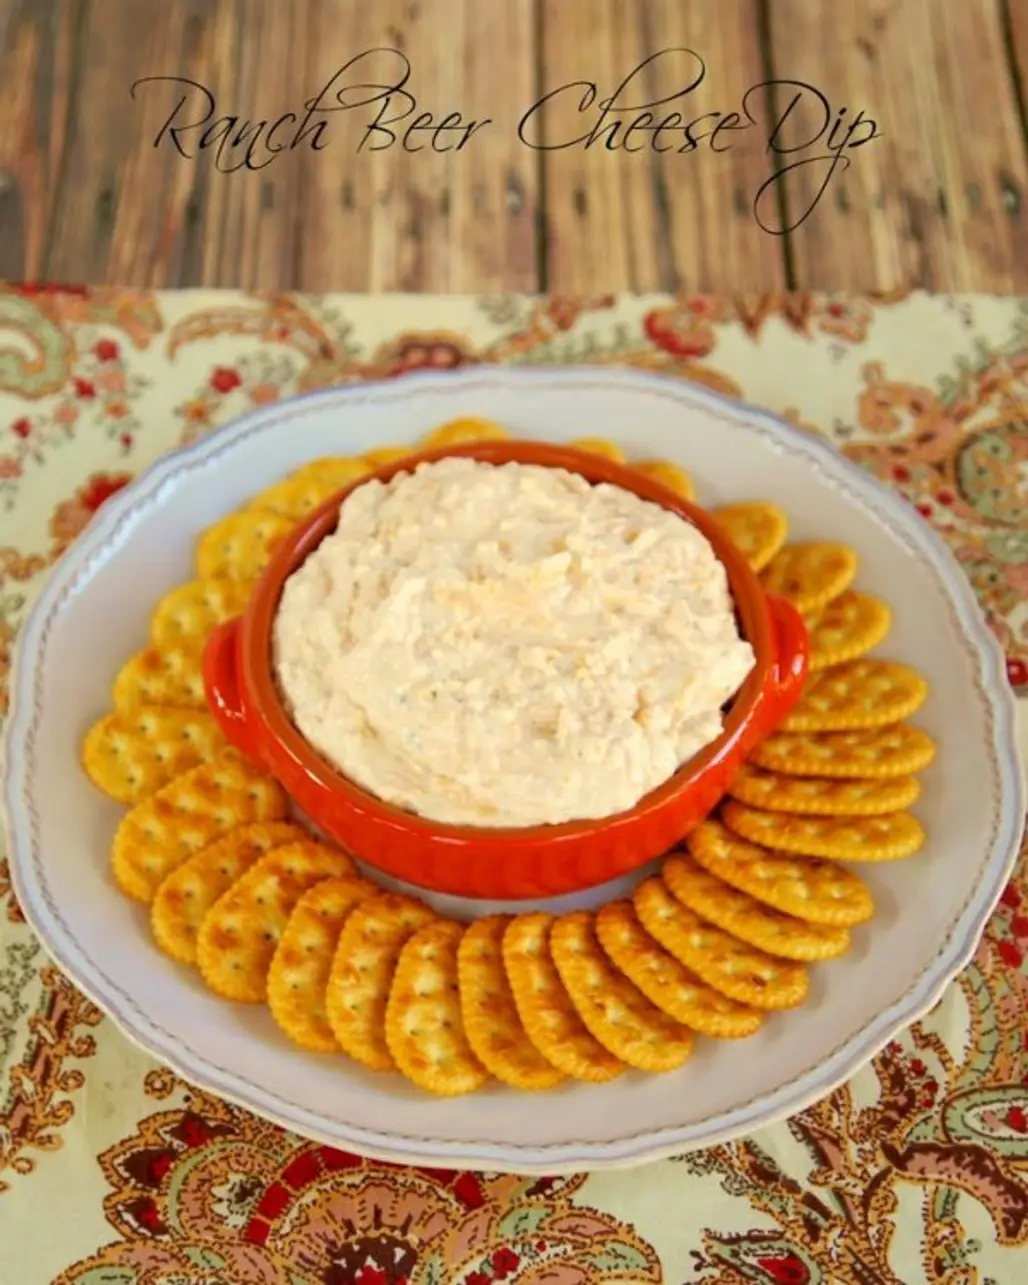 Ranch Beer Cheese Dip with Crackers